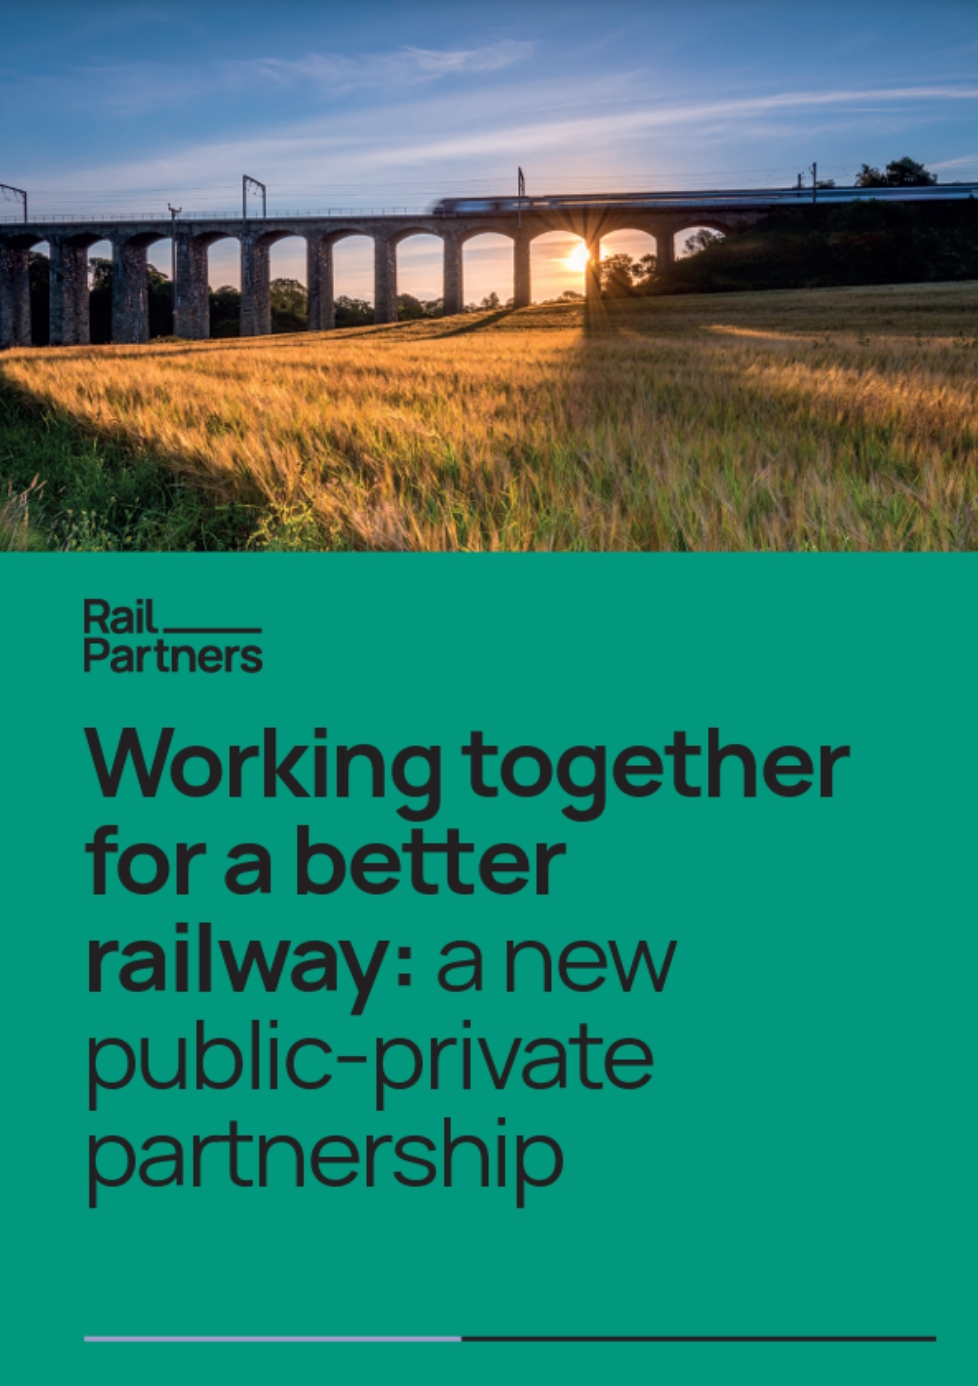 Working together for a better railway: A new public-private partnership